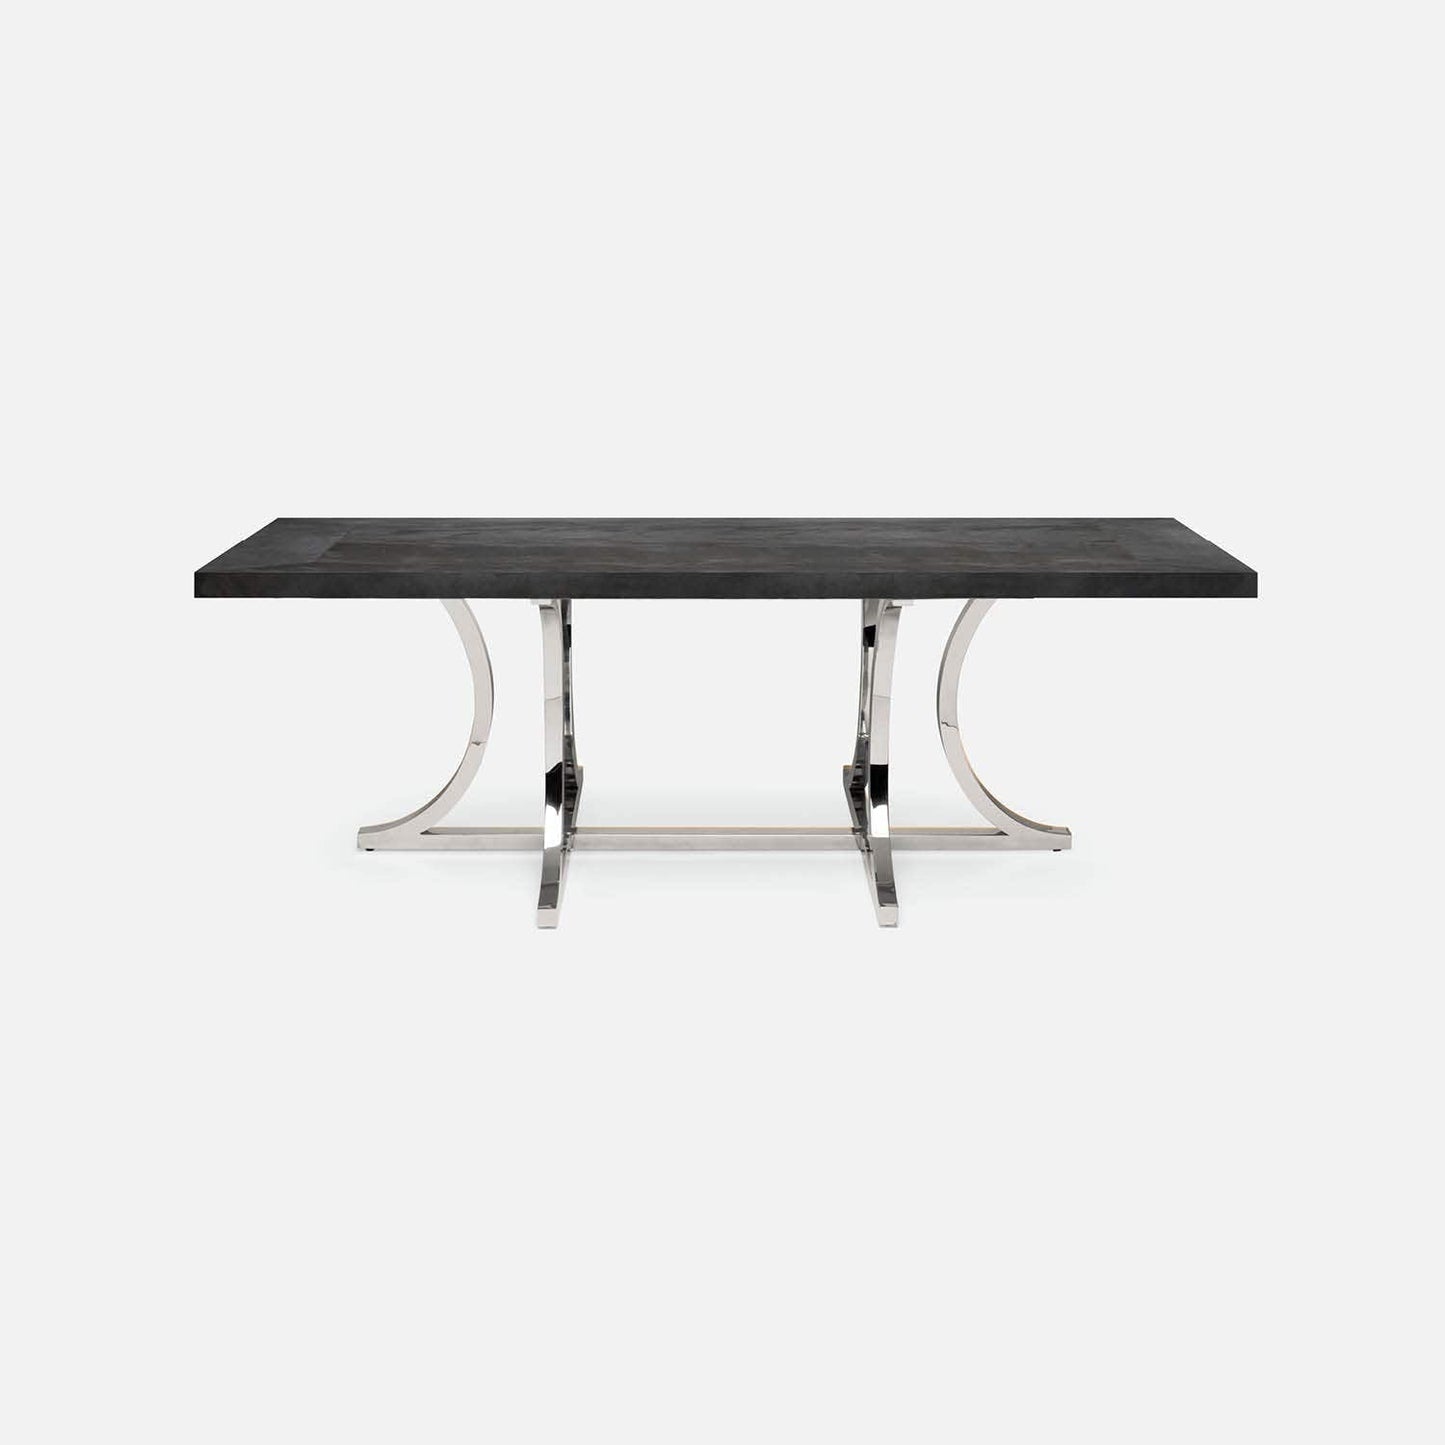 Made Goods Leighton 88" x 40" x 30" Polished Silver Steel Dinning Table With Rectangle Zinc Metal Table Top